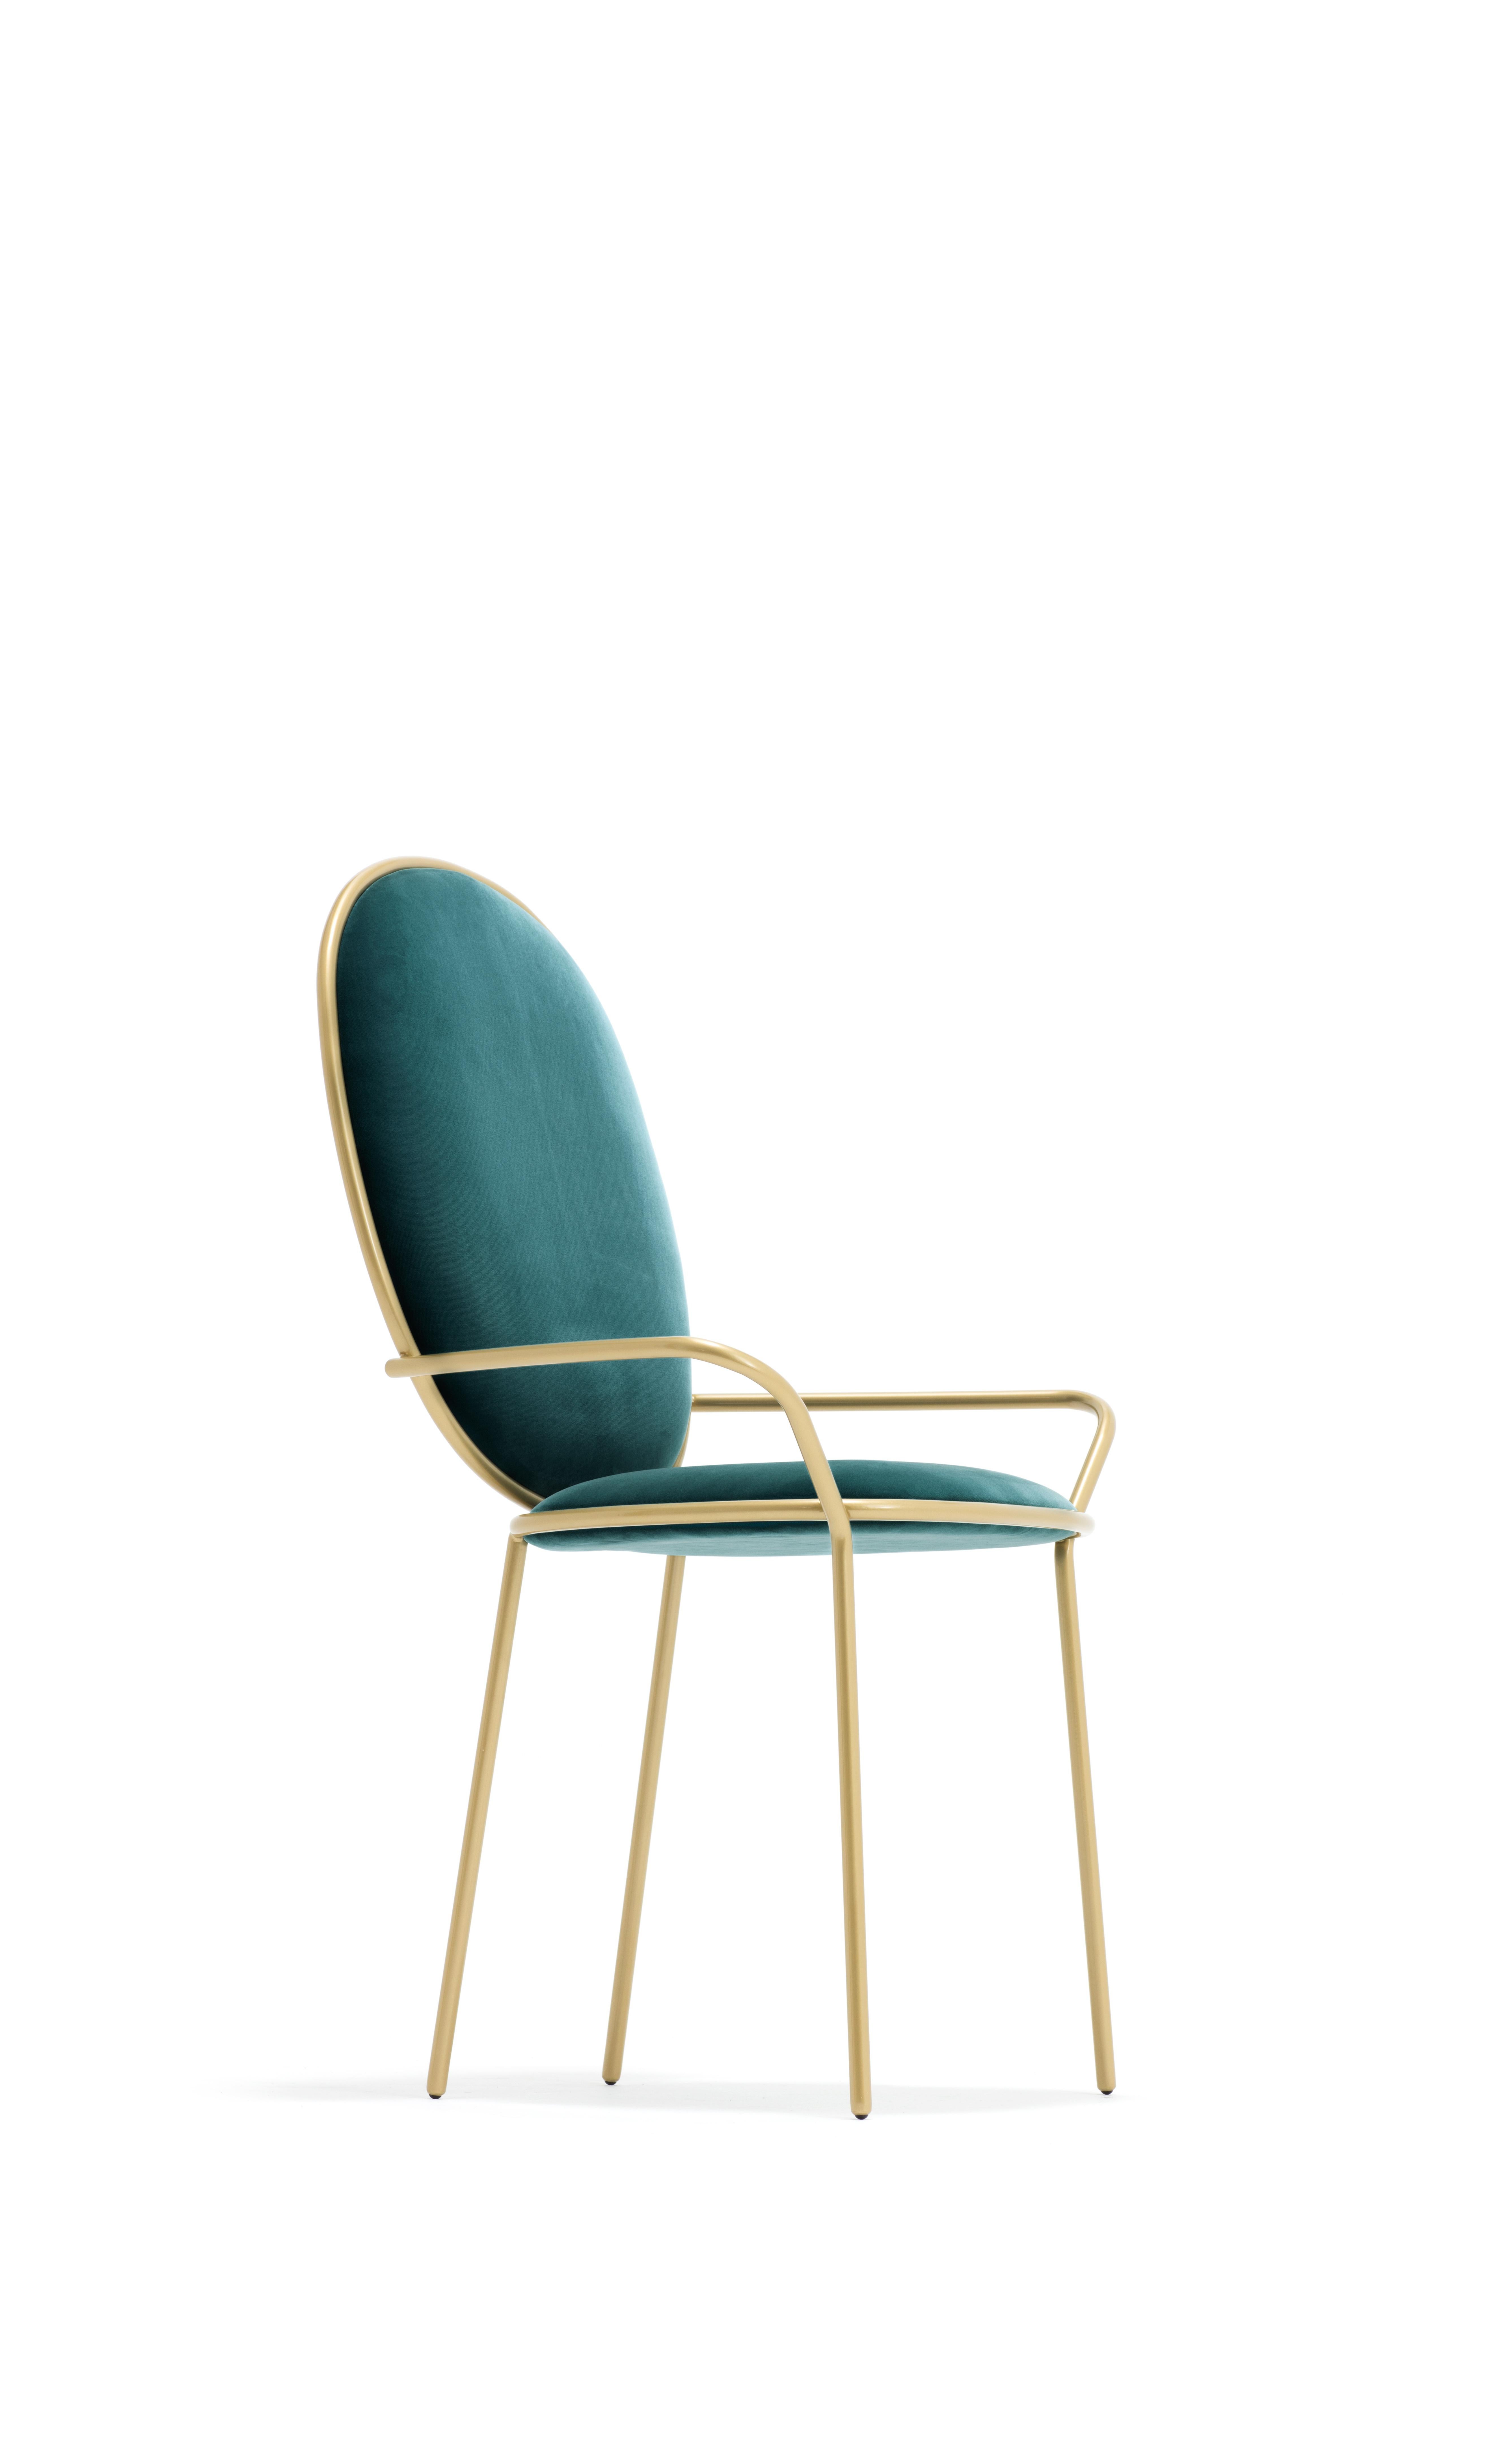 Modern Contemporary Ocean Green Velvet Upholstered Dining Armchair, Stay by Nika Zupanc